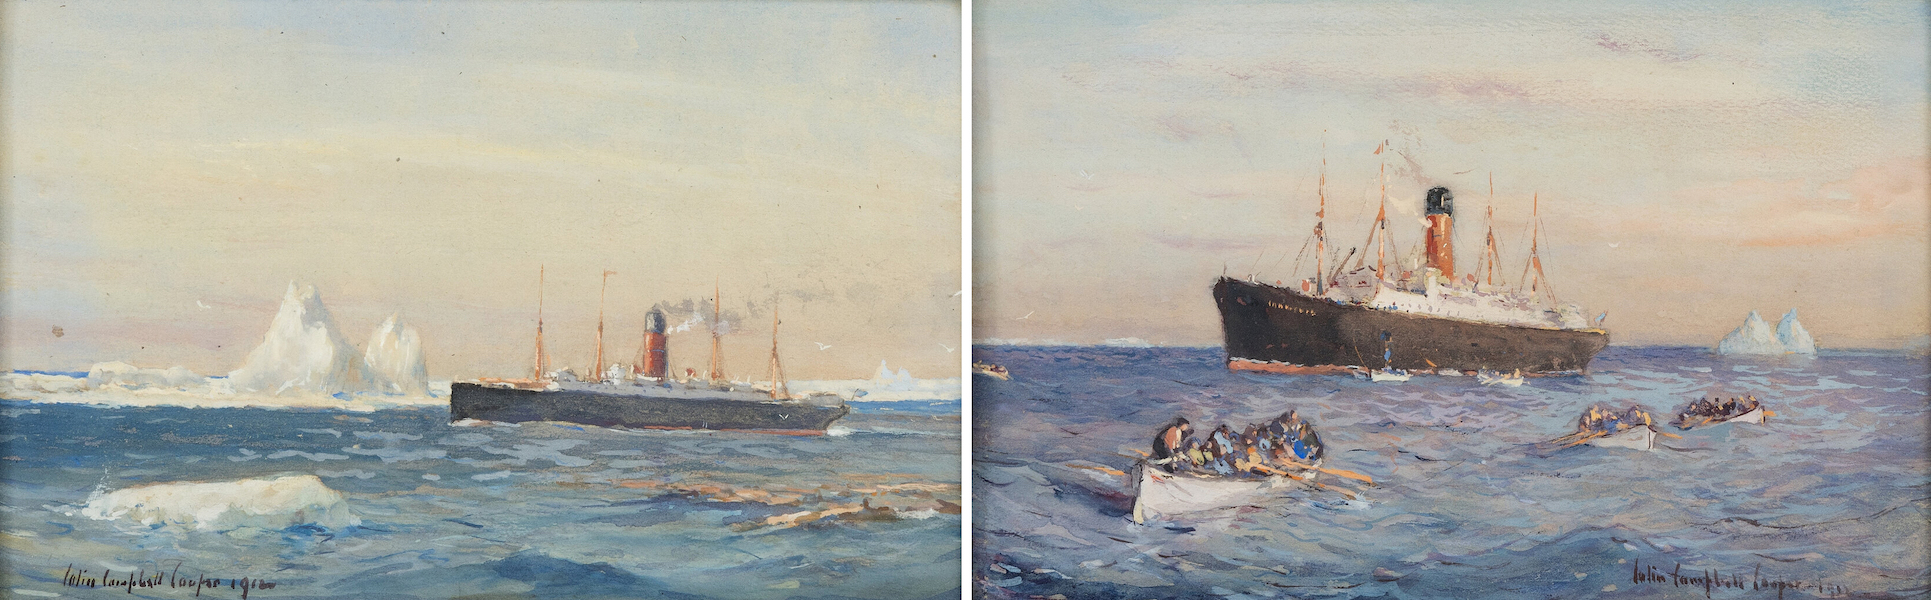 Colin Campbell Cooper paintings of the rescue of survivors of the sinking of the Titanic, created as he watched the scenes from the deck of the Carpathia, $112,500. Images courtesy of Heritage Auctions